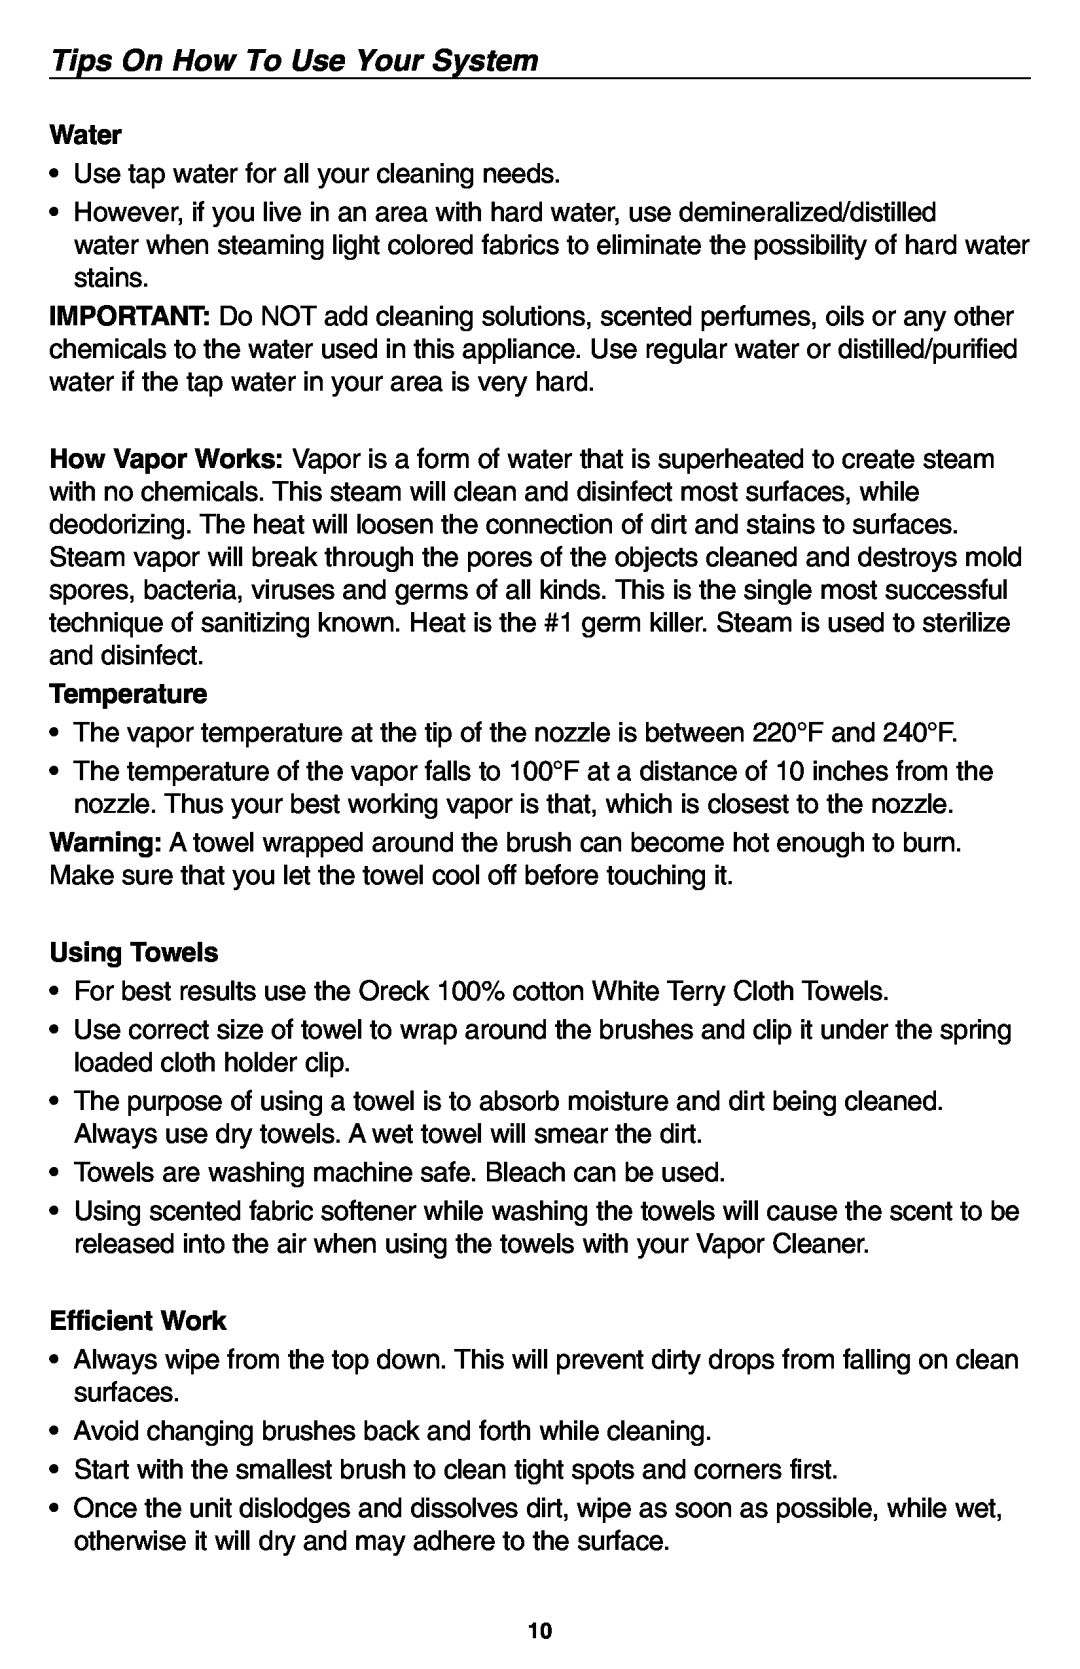 Oreck USER'S GUIDE warranty Tips On How To Use Your System, Water, Temperature, Using Towels, Efficient Work 